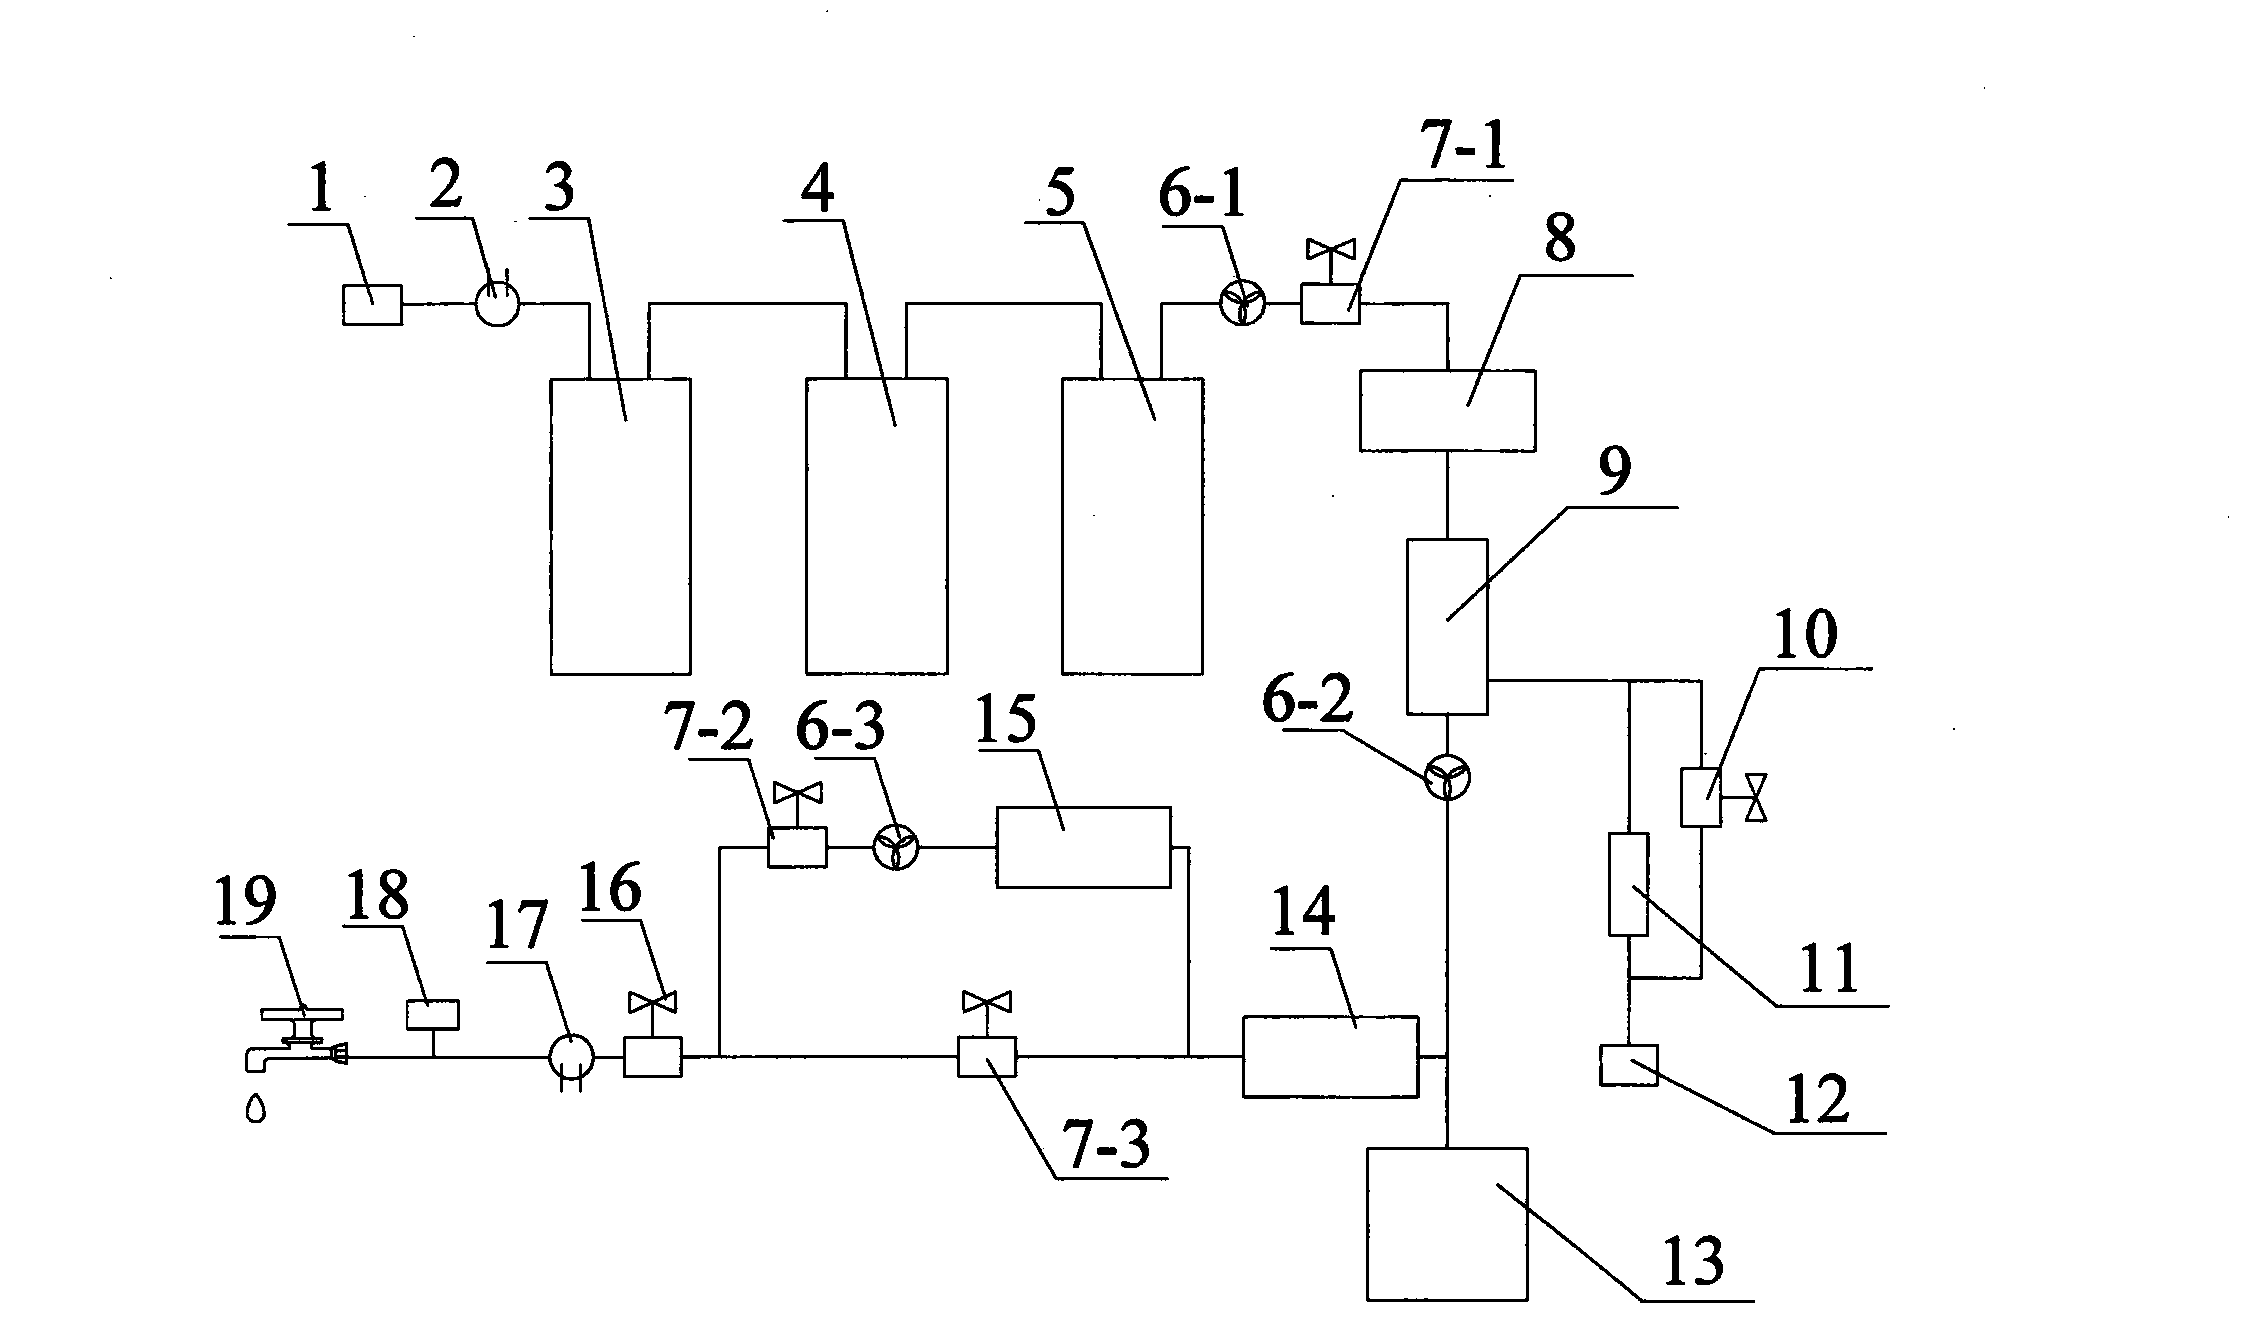 Water treatment system with faucet provided with display control panel